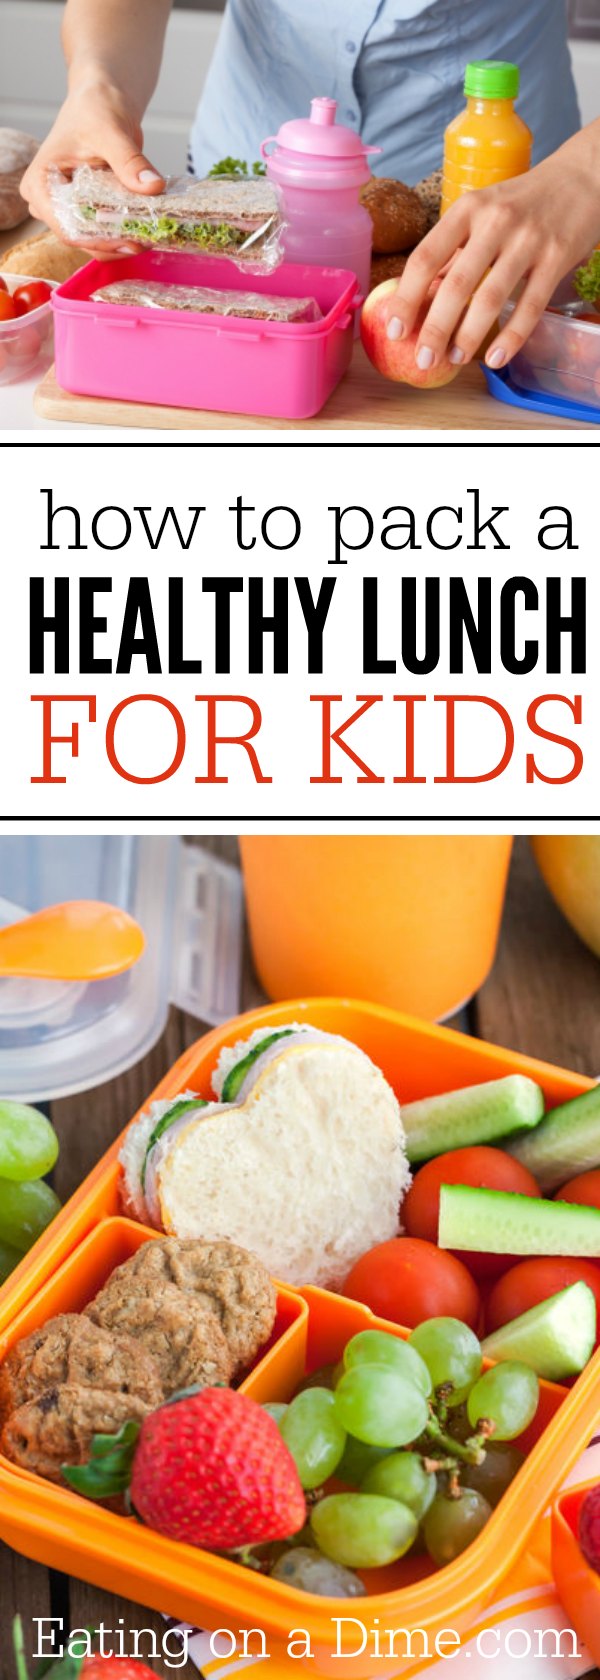 https://www.eatingonadime.com/wp-content/uploads/2017/07/how-to-pack-a-healthy-lunch-for-kids-easy-to-make.jpg